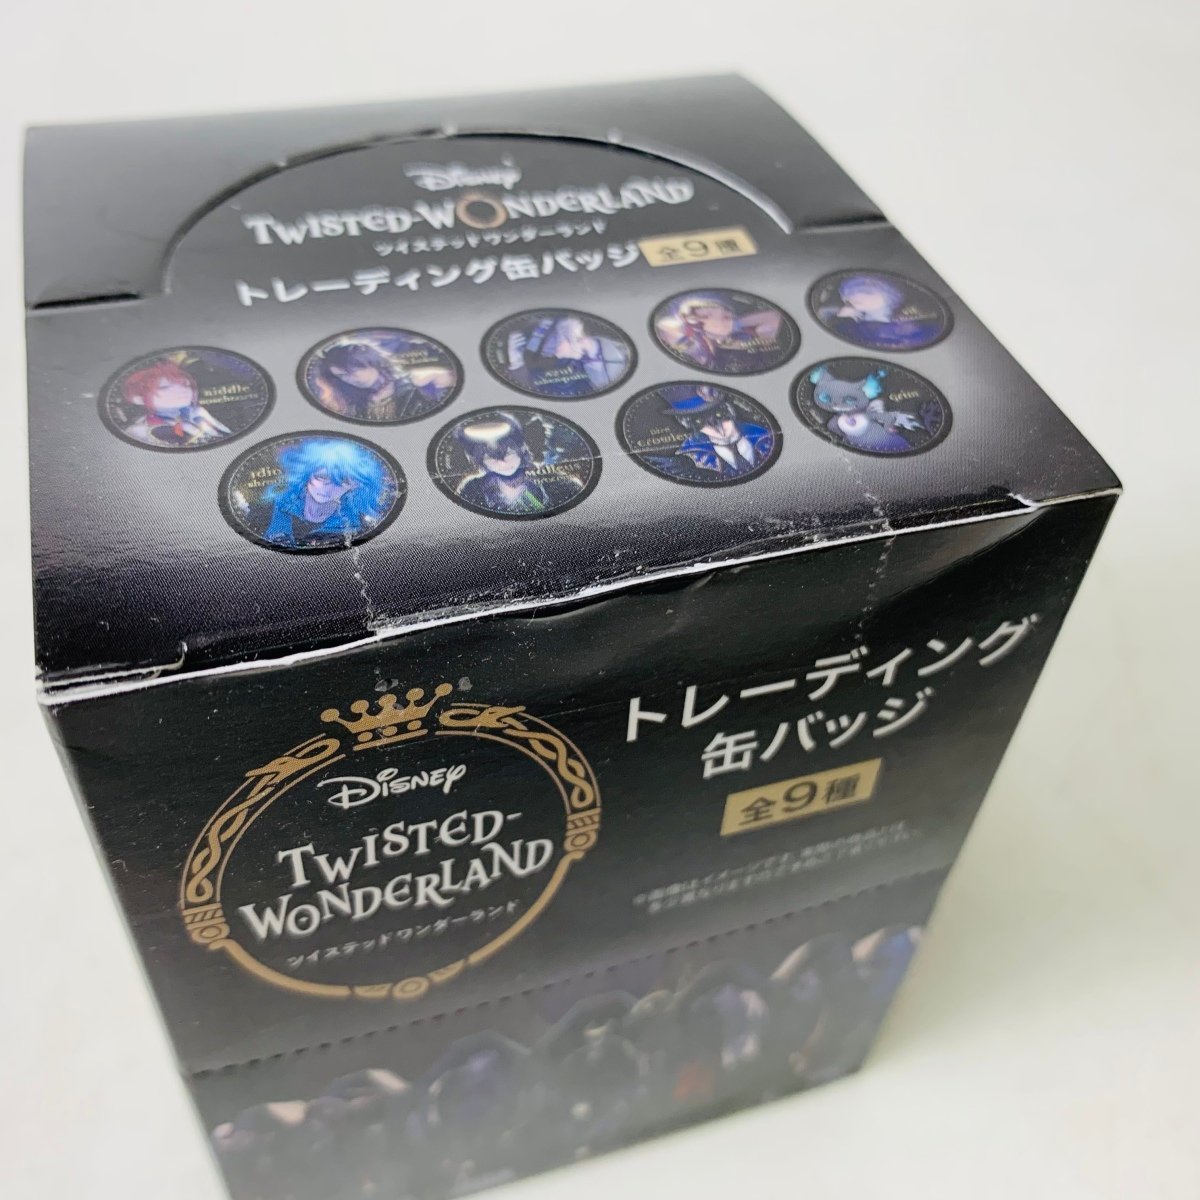  new goods unopened tsui ste do wonder Land trailing can badge all 9 kind 1BOX